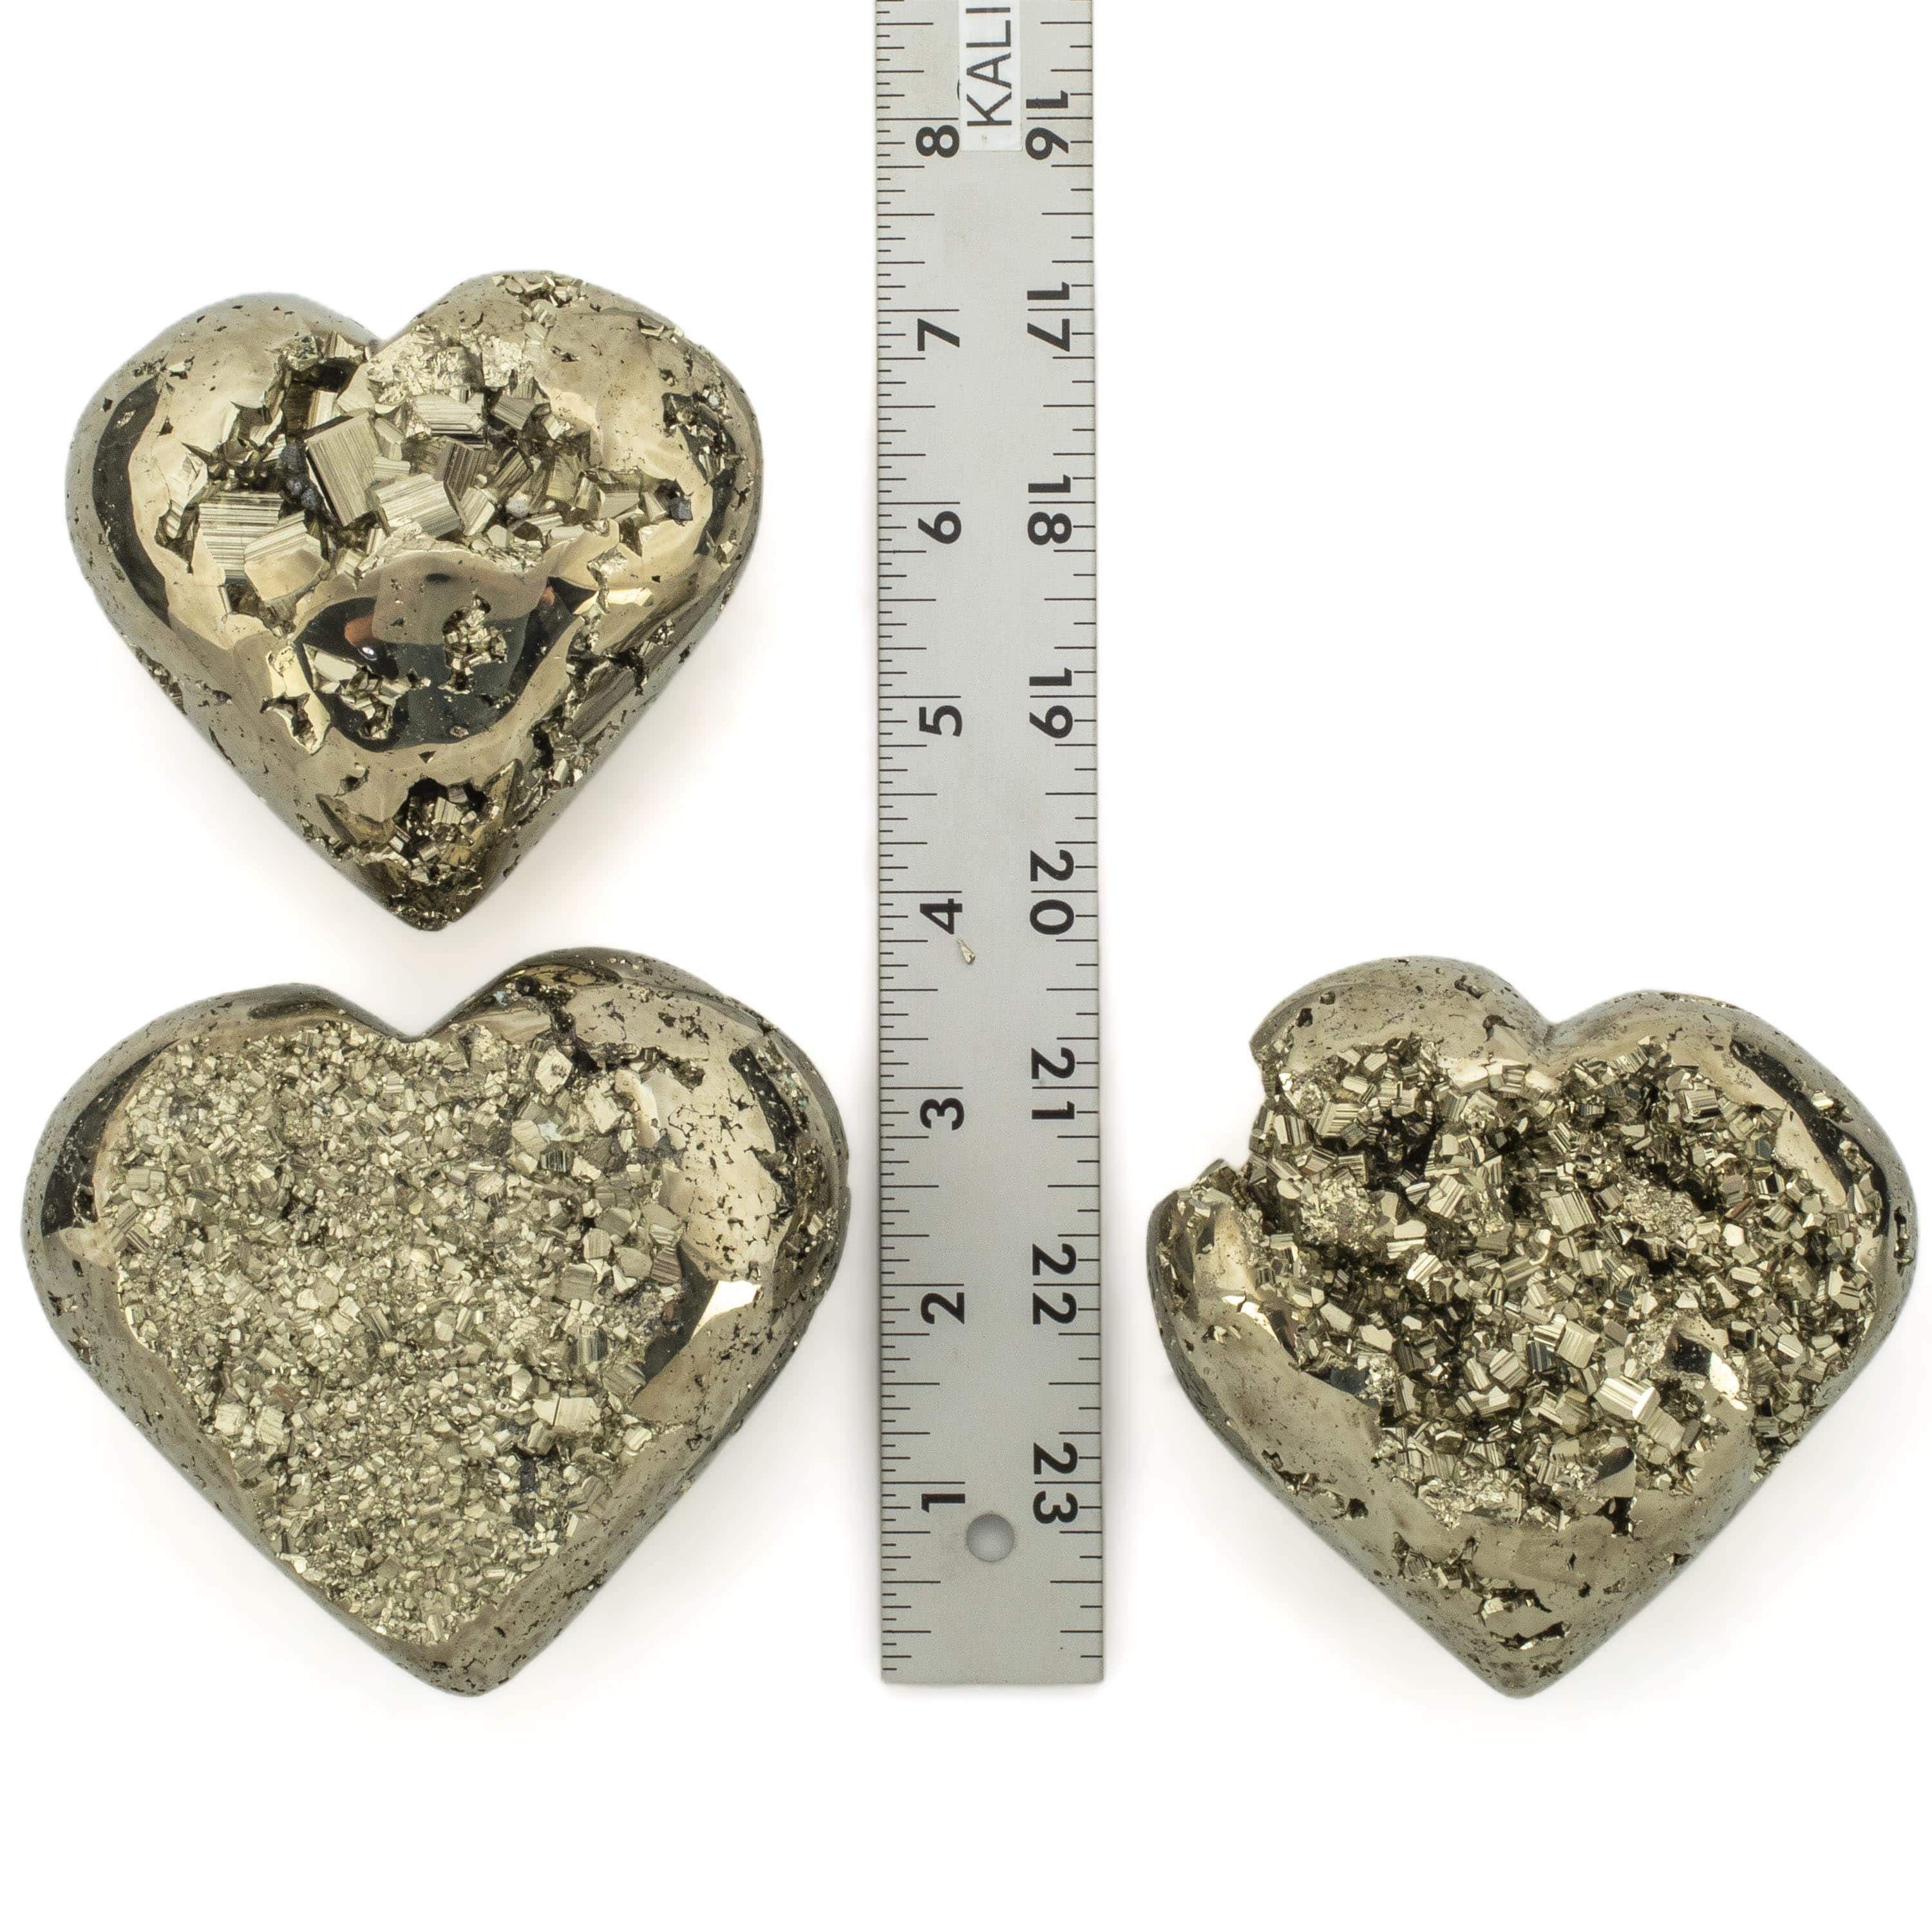 Kalifano Pyrite Pyrite Heart Carving 5" / 700g GH800-PC